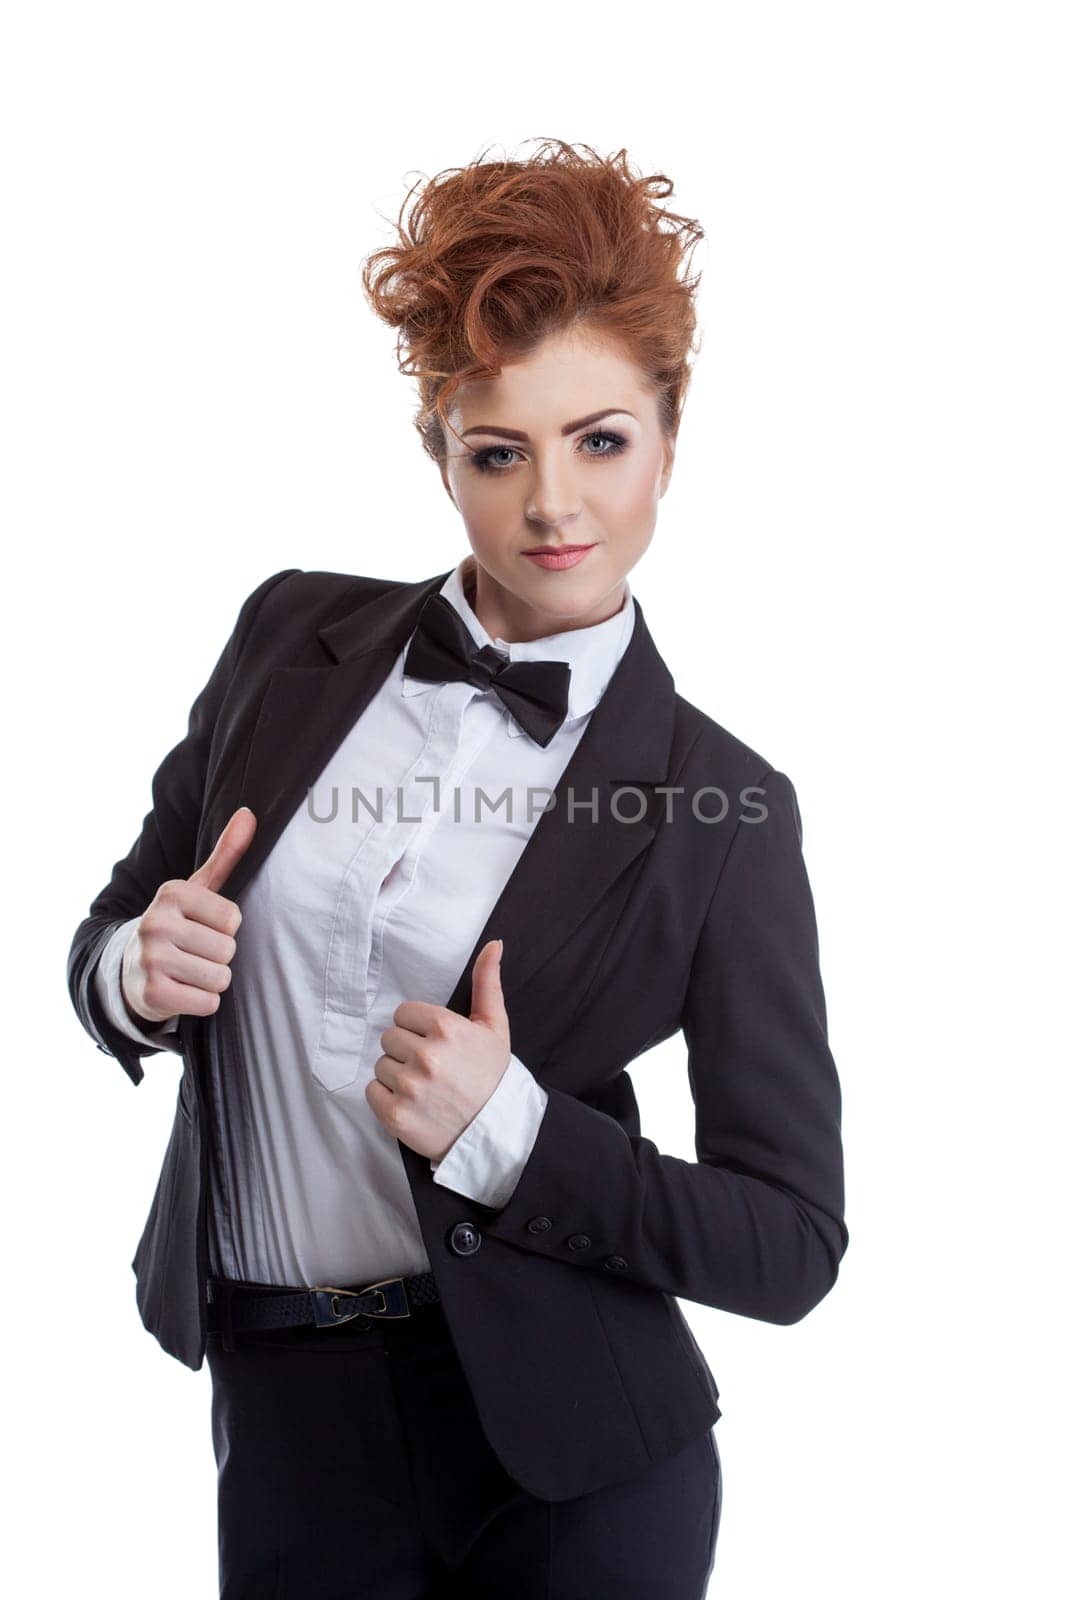 Red-haired business lady showing thumbs up. Isolated on white